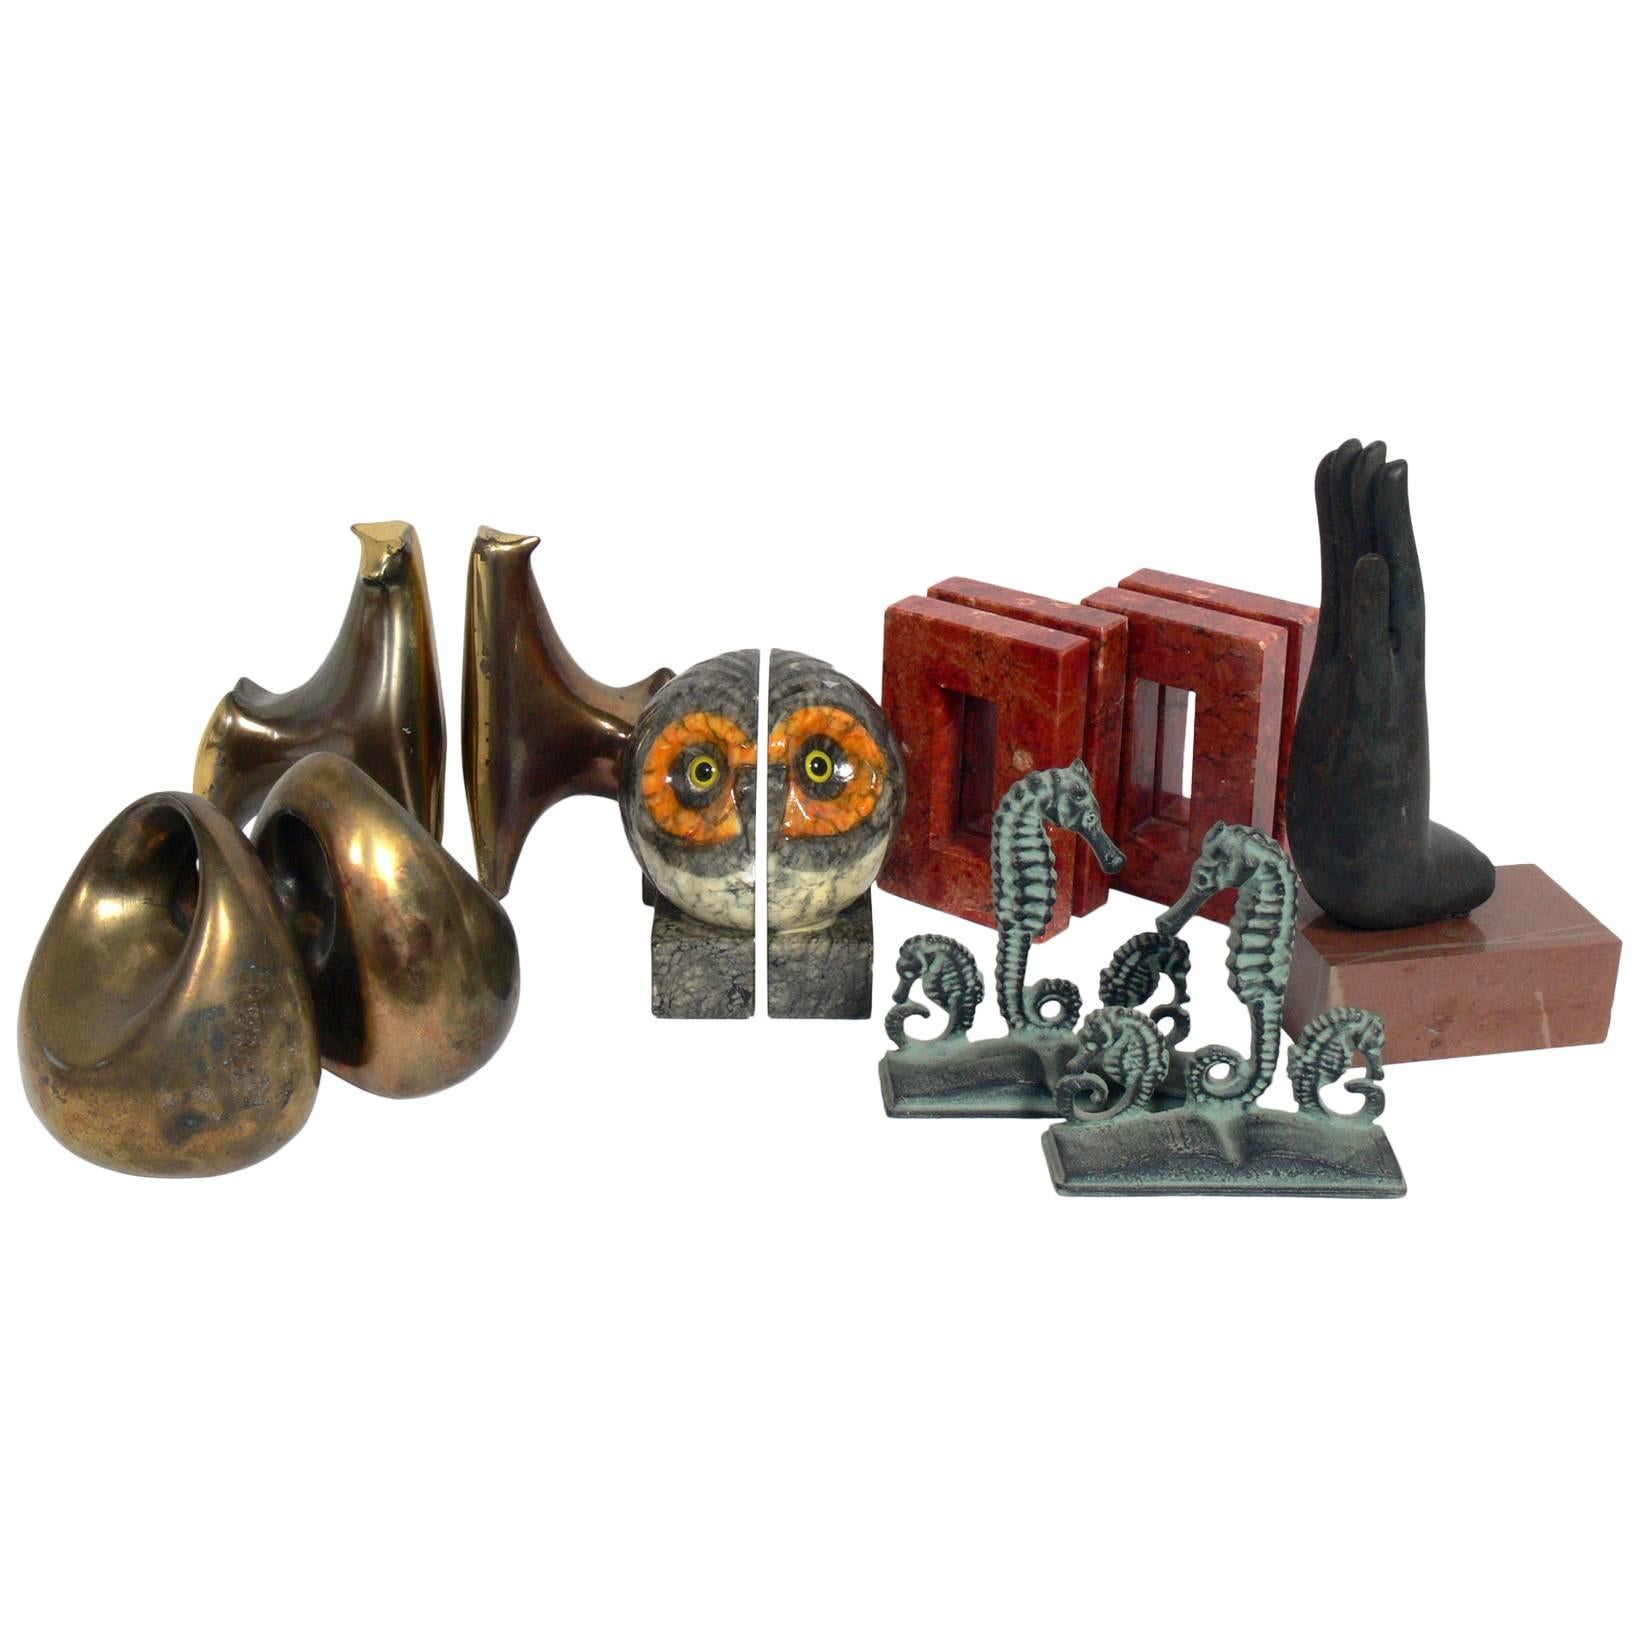 Selection of Mid Century Modern Bookends